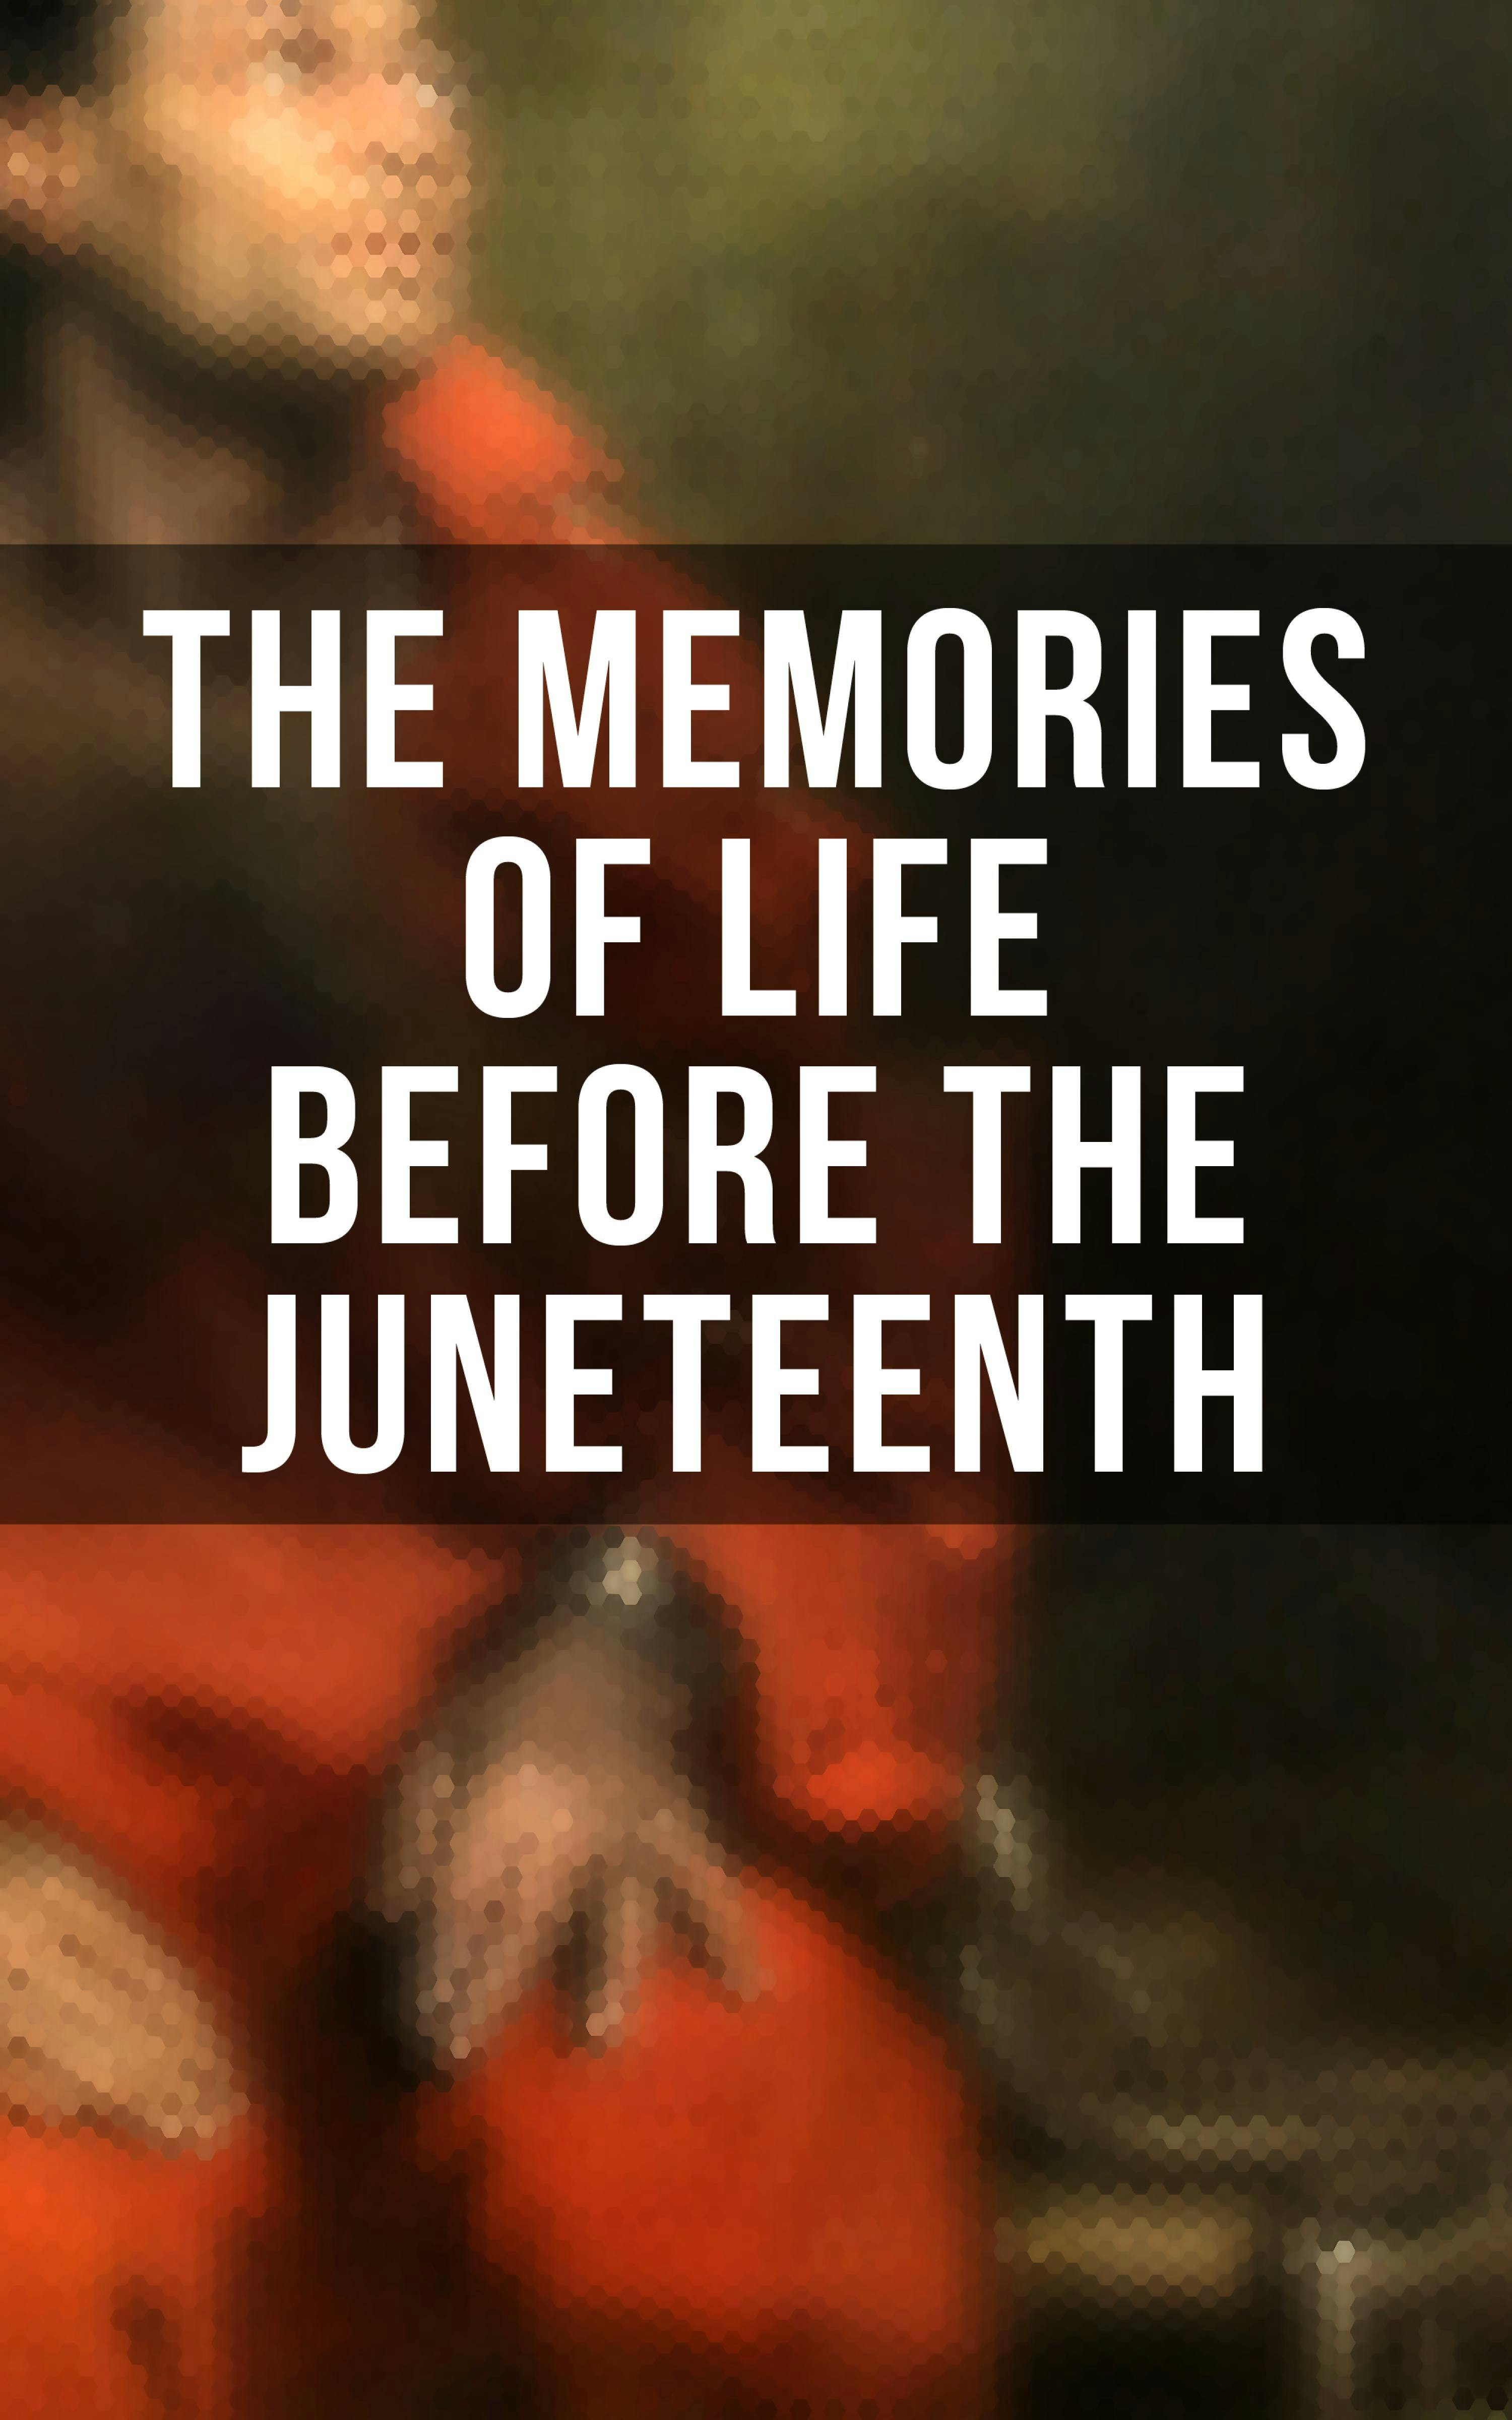 The Memories of Life Before the Juneteenth: Memoirs, Interviews, Testimonies, Studies, Novels, Official Records on Slavery and Abolitionism - undefined